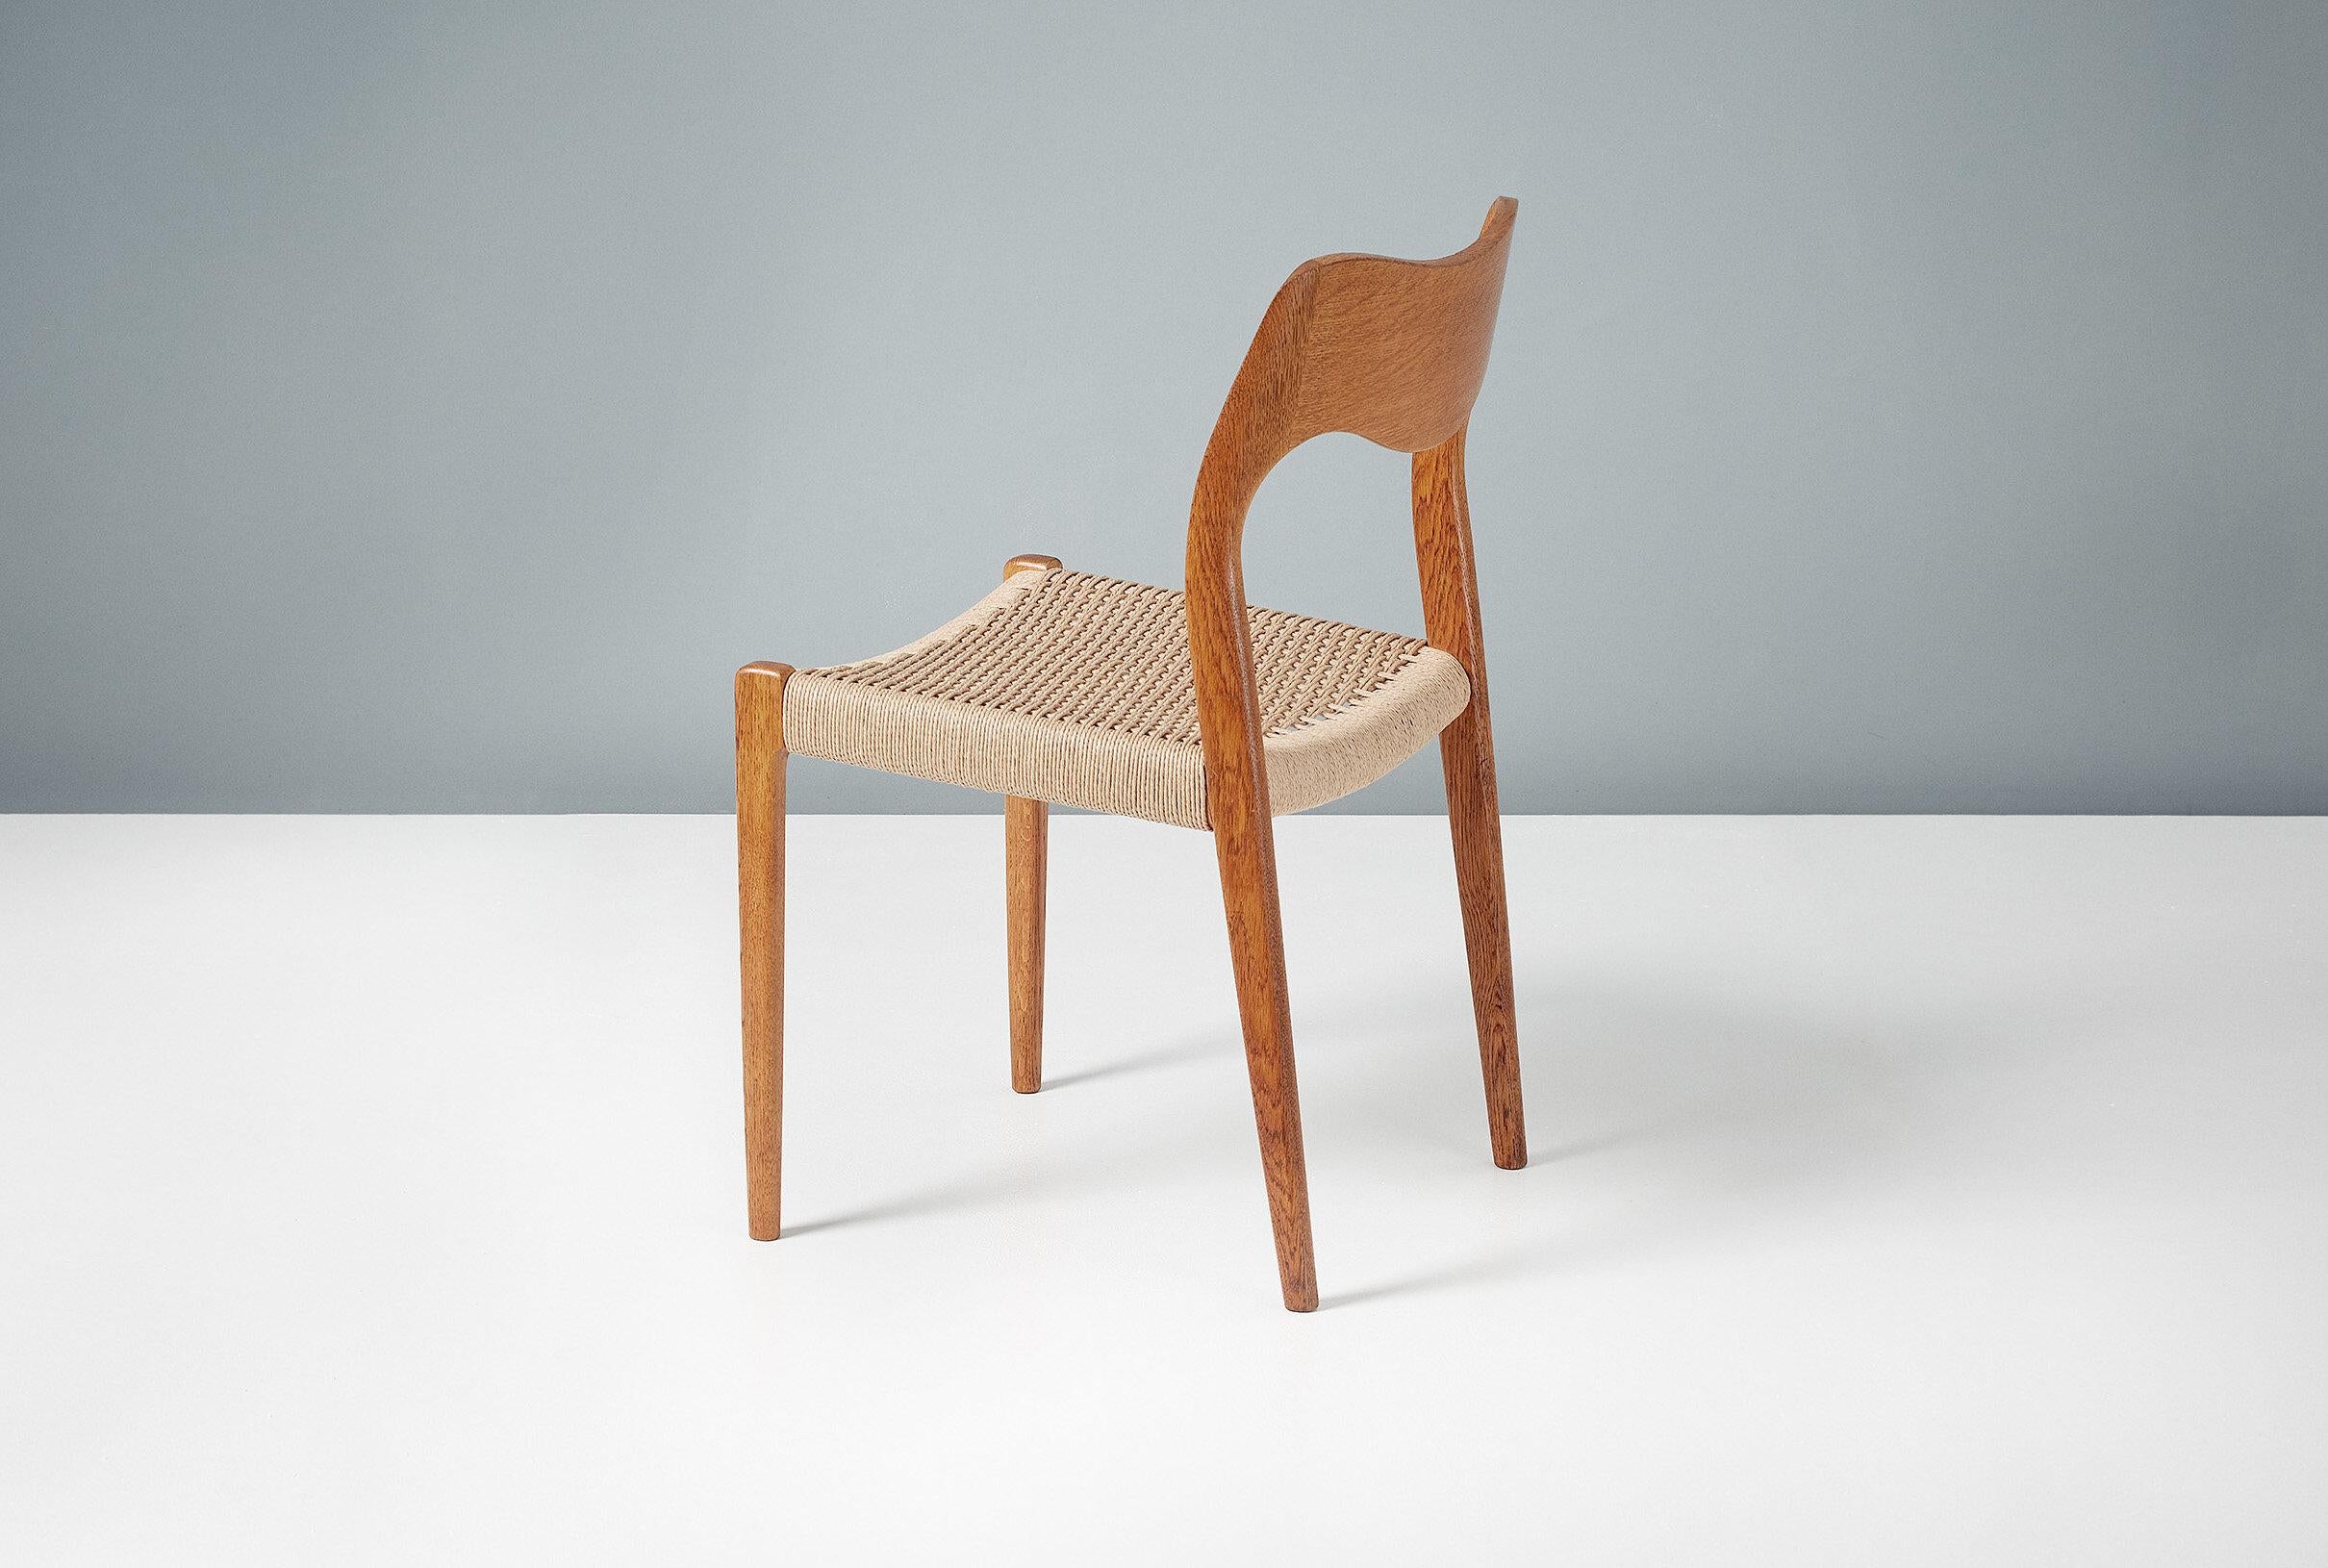 Niels O. Møller

Model 71 dining chairs, oak

Set of 6 oak dining chairs designed by Niels O. Moller for his own company J.L. Moller Mobelfabrik, Denmark. The Model 71 was one of Moller’s first designs and remains an all time Danish classic. The